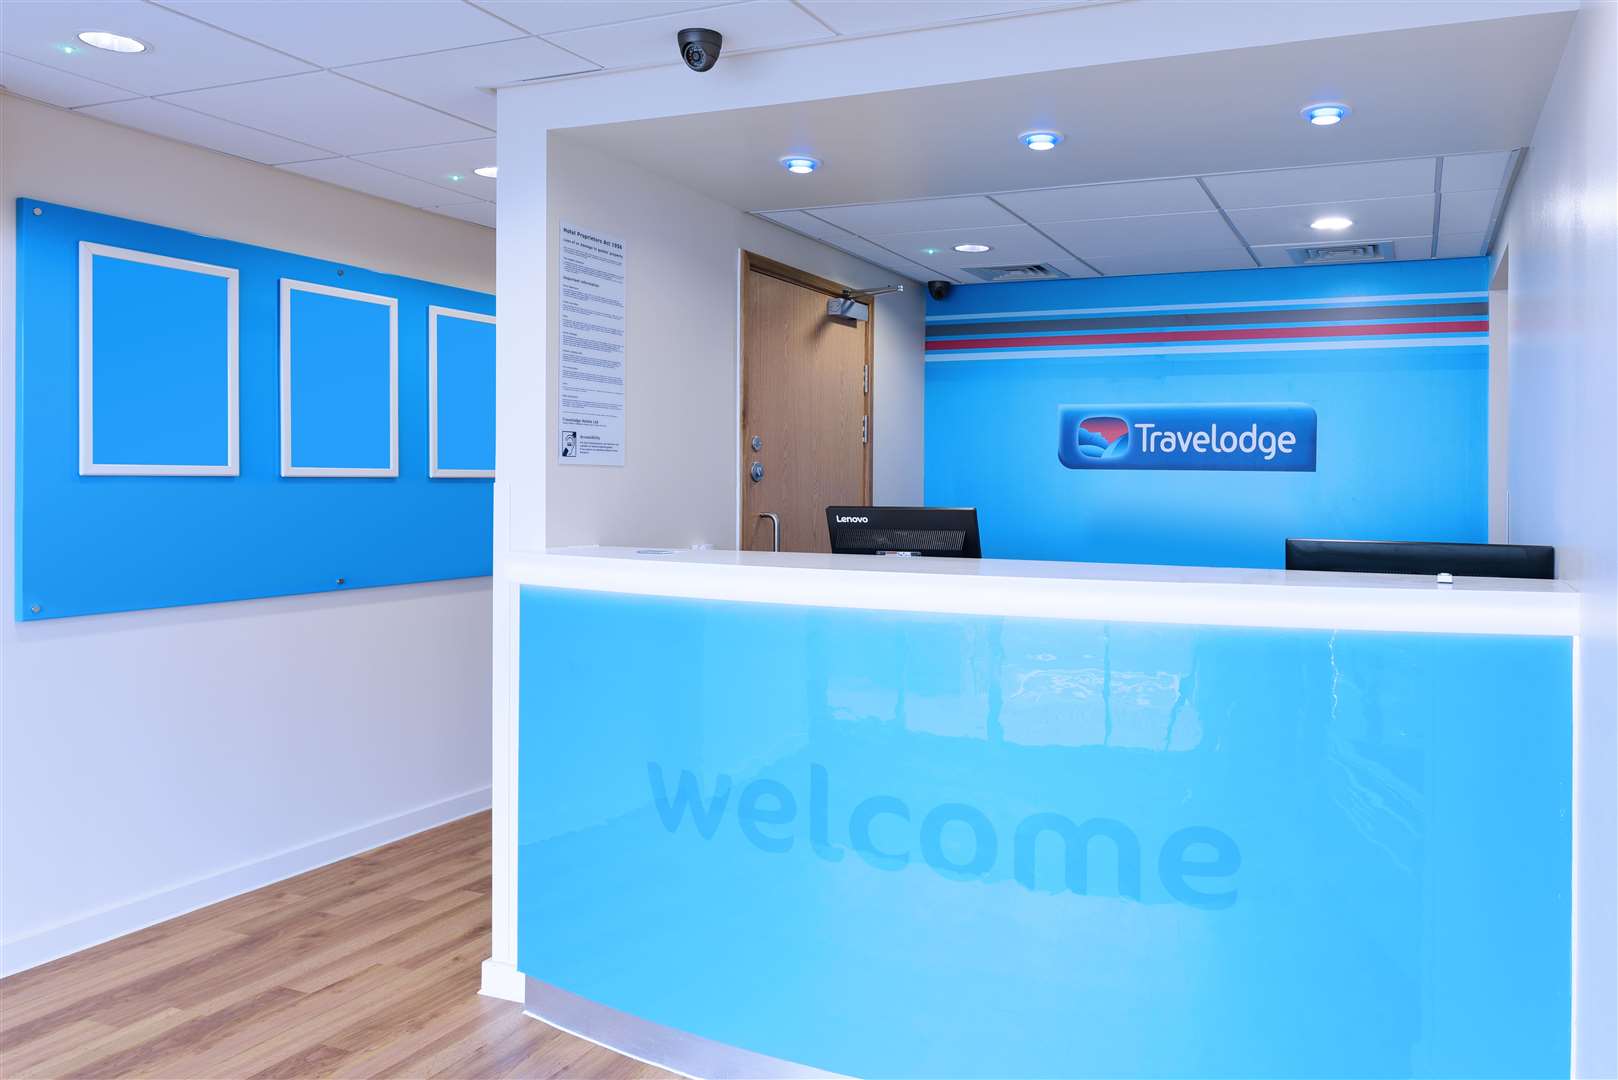 Travelodge says the new roles are ideal for parents looking to return to work